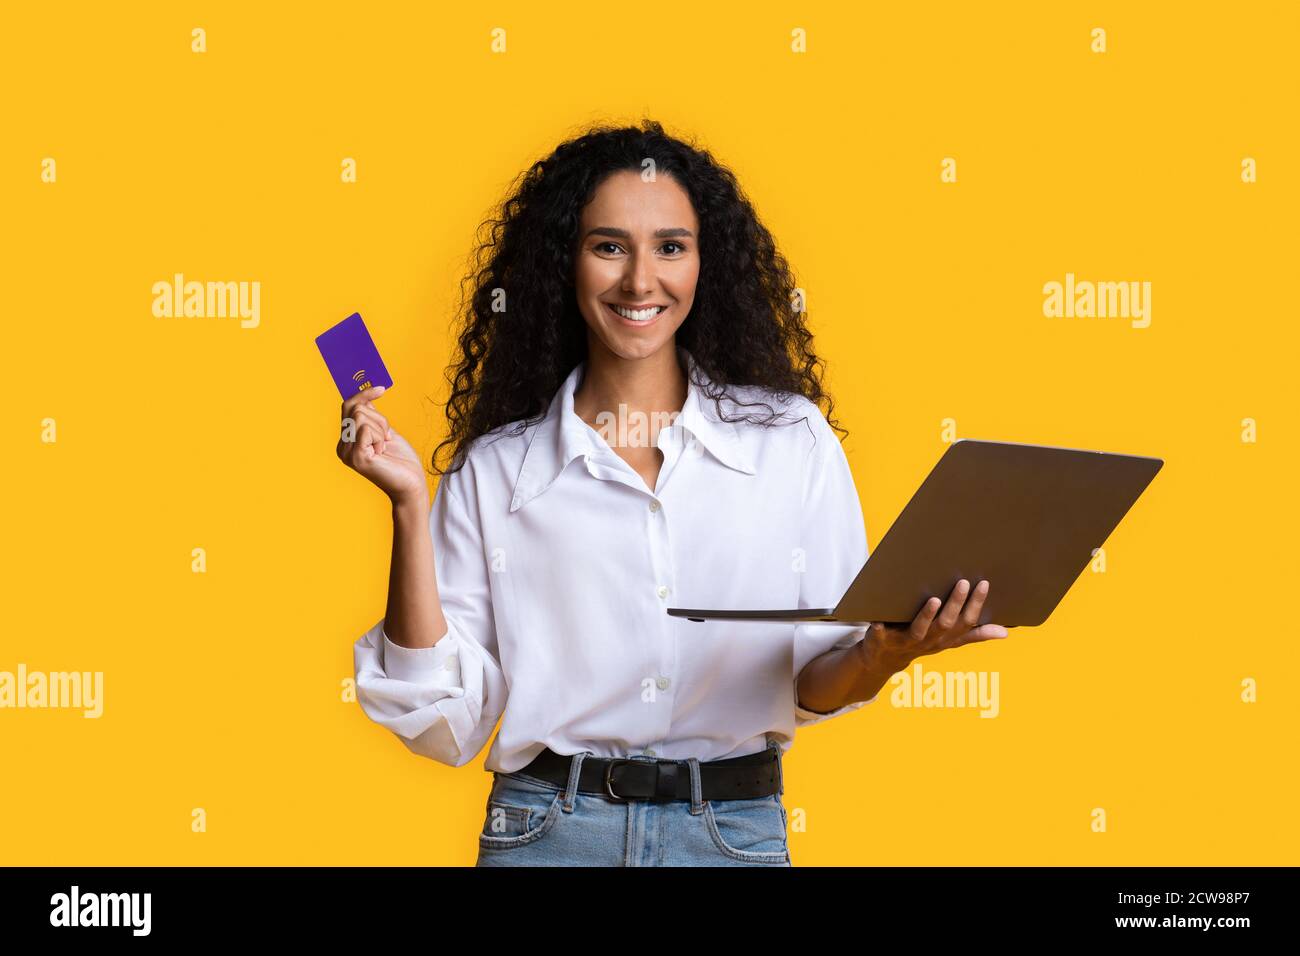 Online Payments. Happy woman with credit card and laptop over yellow background Stock Photo